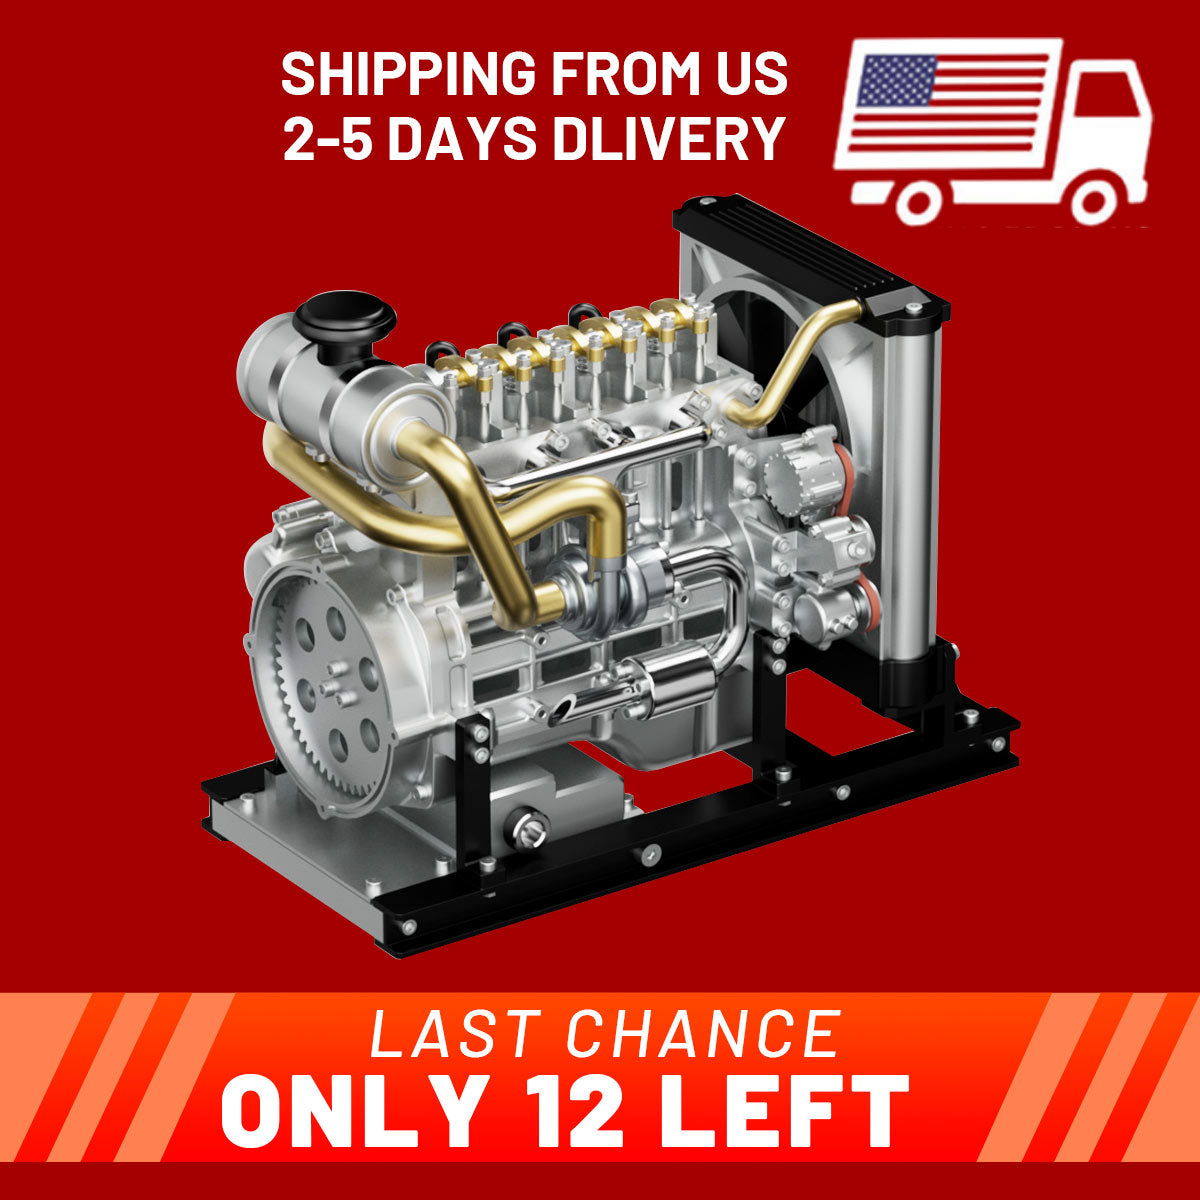 diesel-engine-kits-diy-christmas-usa-shipping-from stirlingkit1200x1200.jpg__PID:112e16b1-365e-4689-bd40-1e8c64d4aaa3